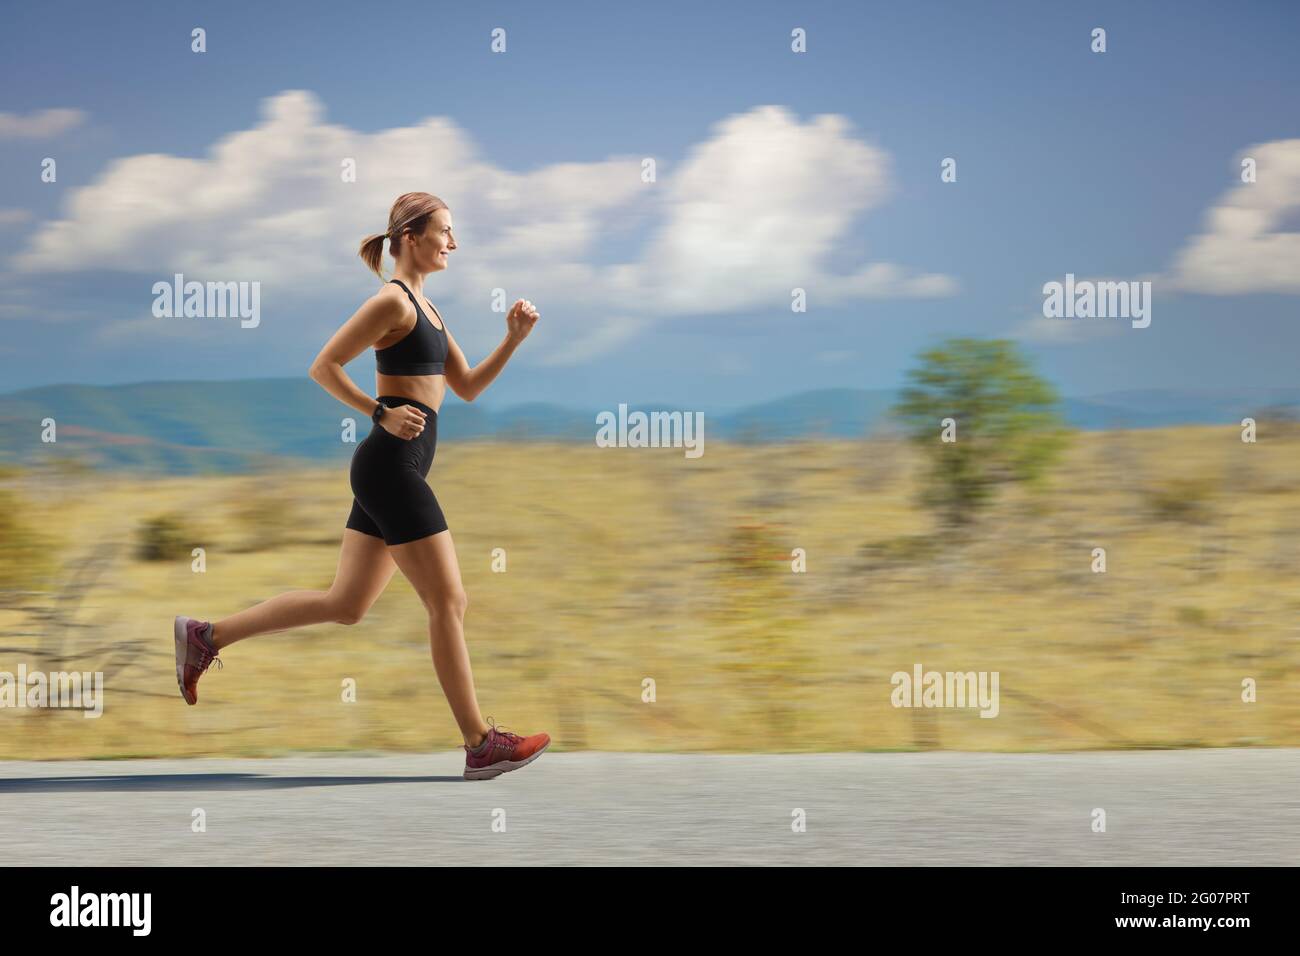 Full length profile shot of a fit young woman jogging on an open road Stock Photo